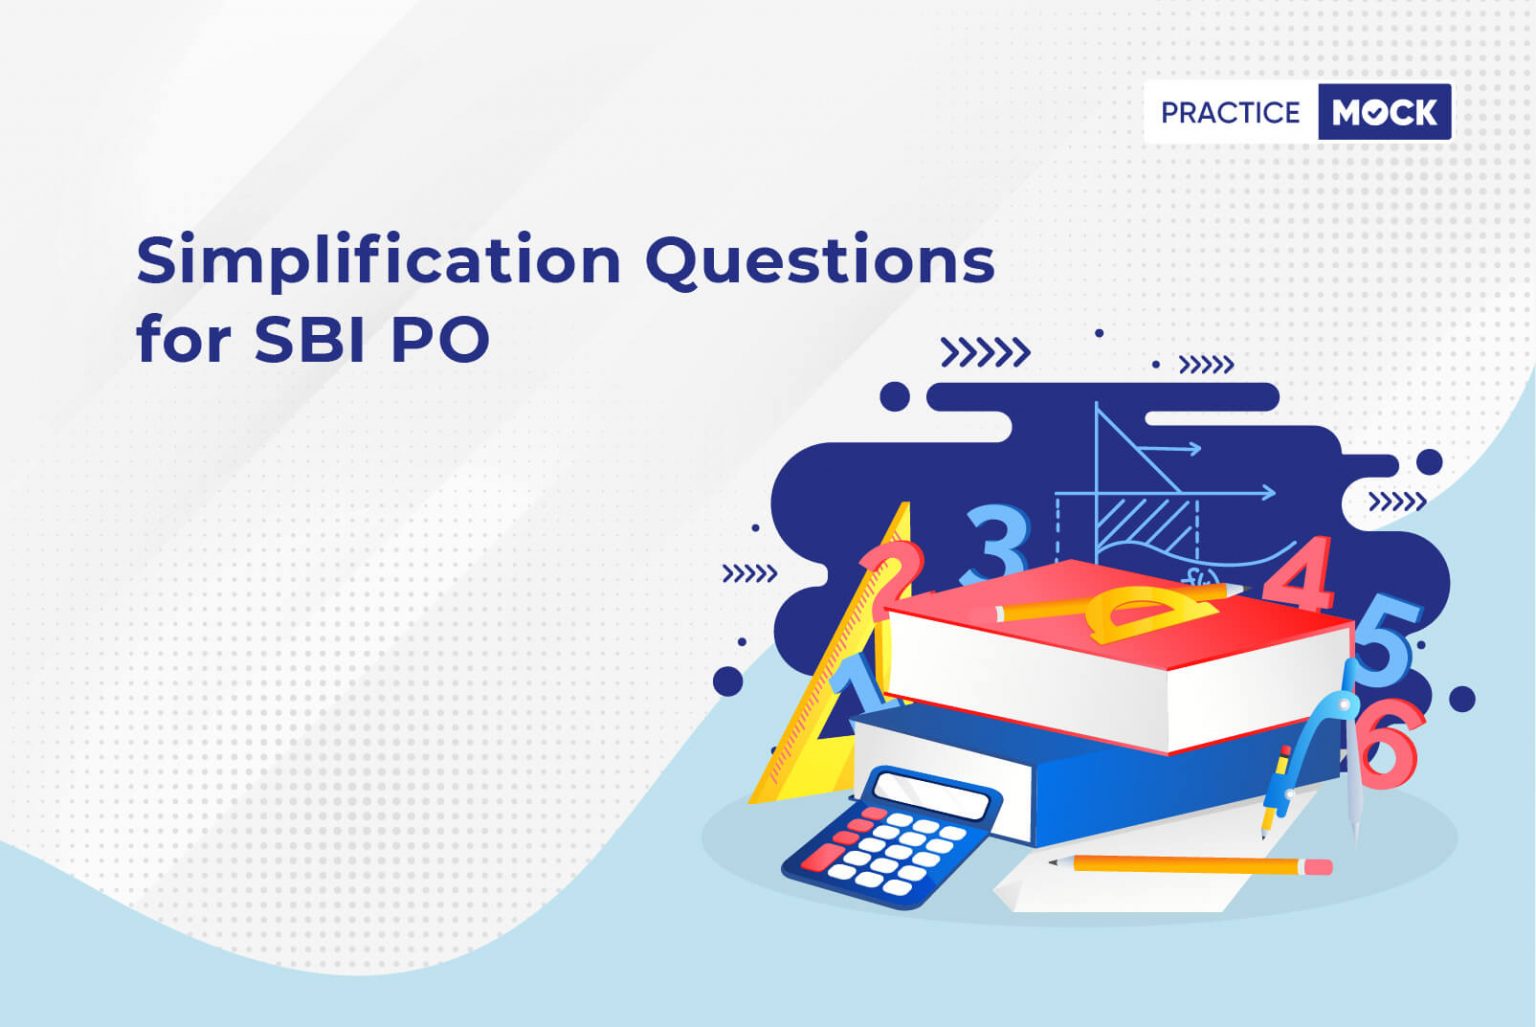 simplification-questions-for-sbi-po-practicemock